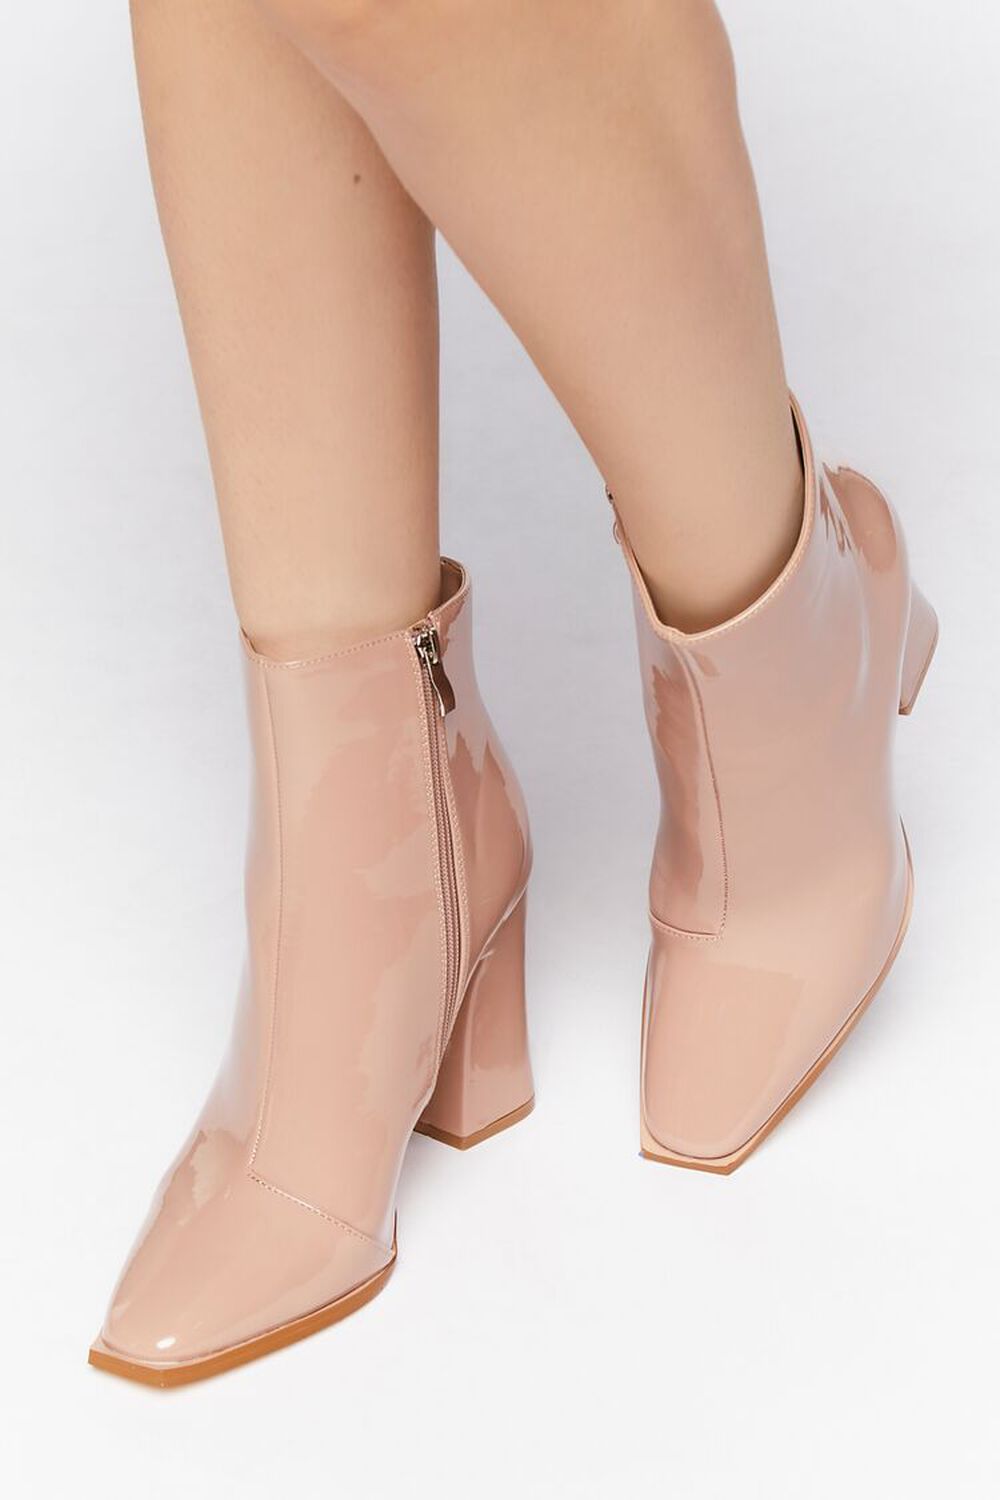 NUDE Faux Patent Leather Booties, image 1